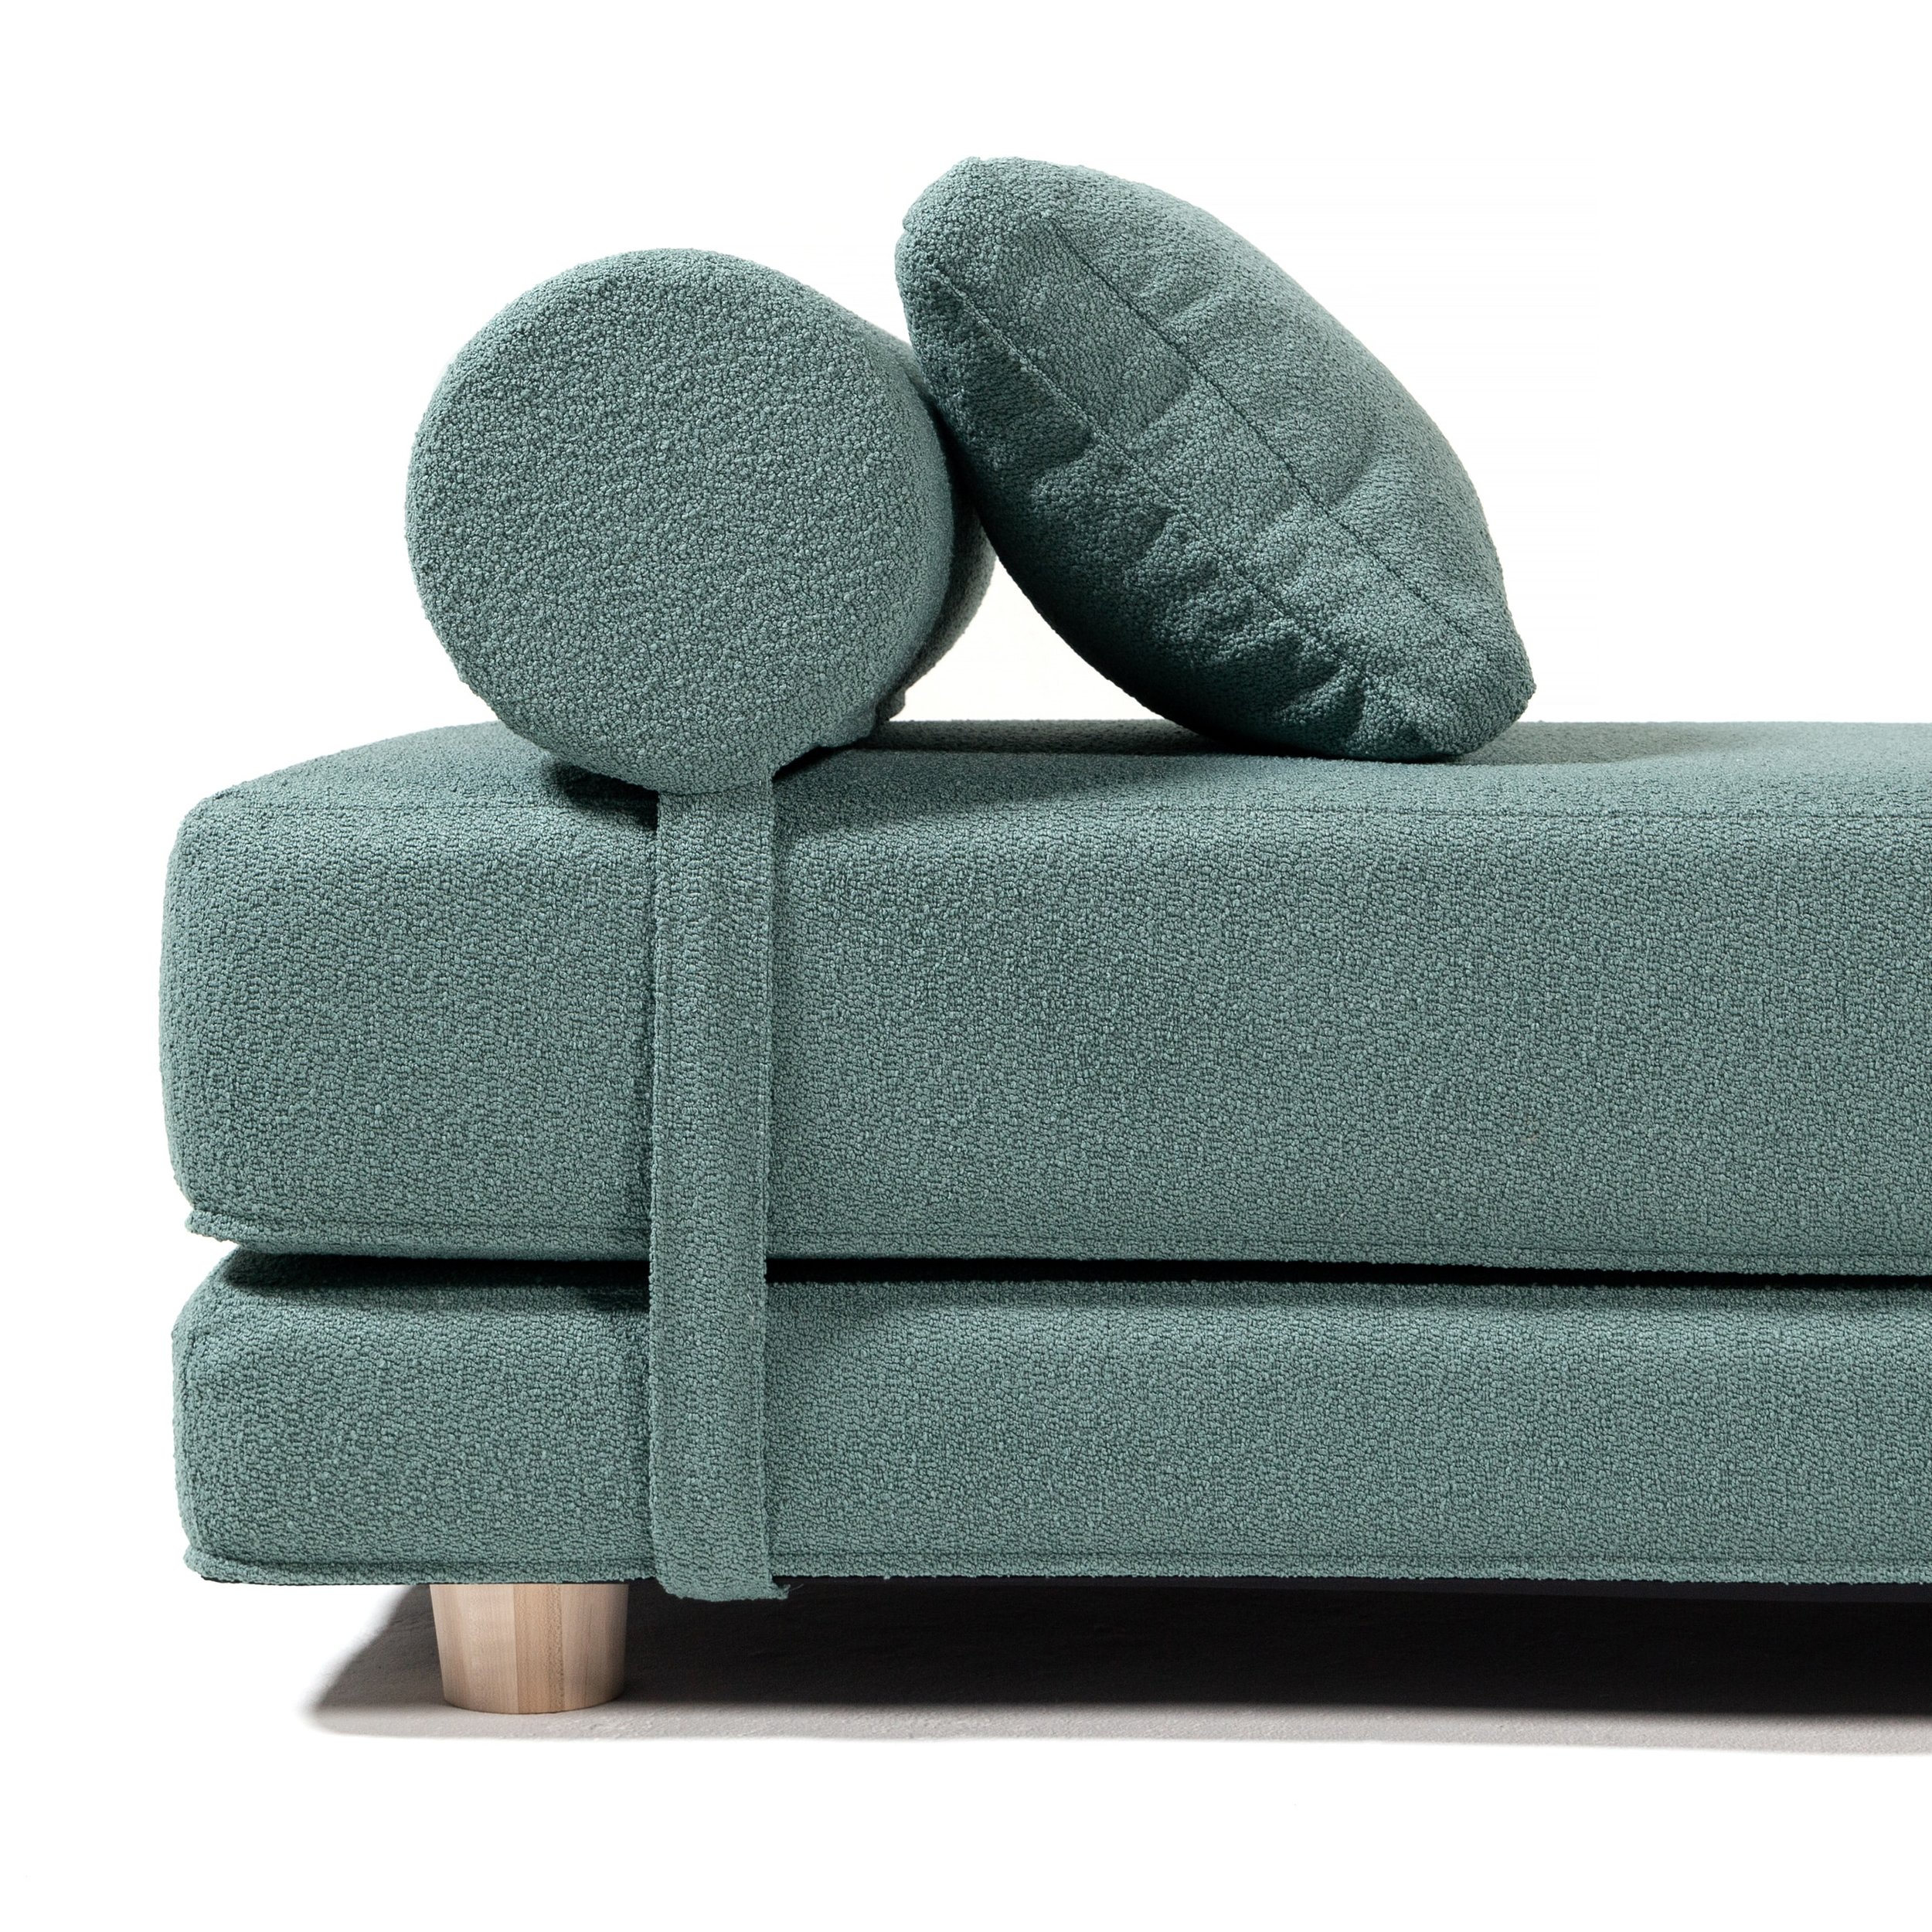 avida-daybed-boucle-green-gladys024-product-4-3000x3000.jpg